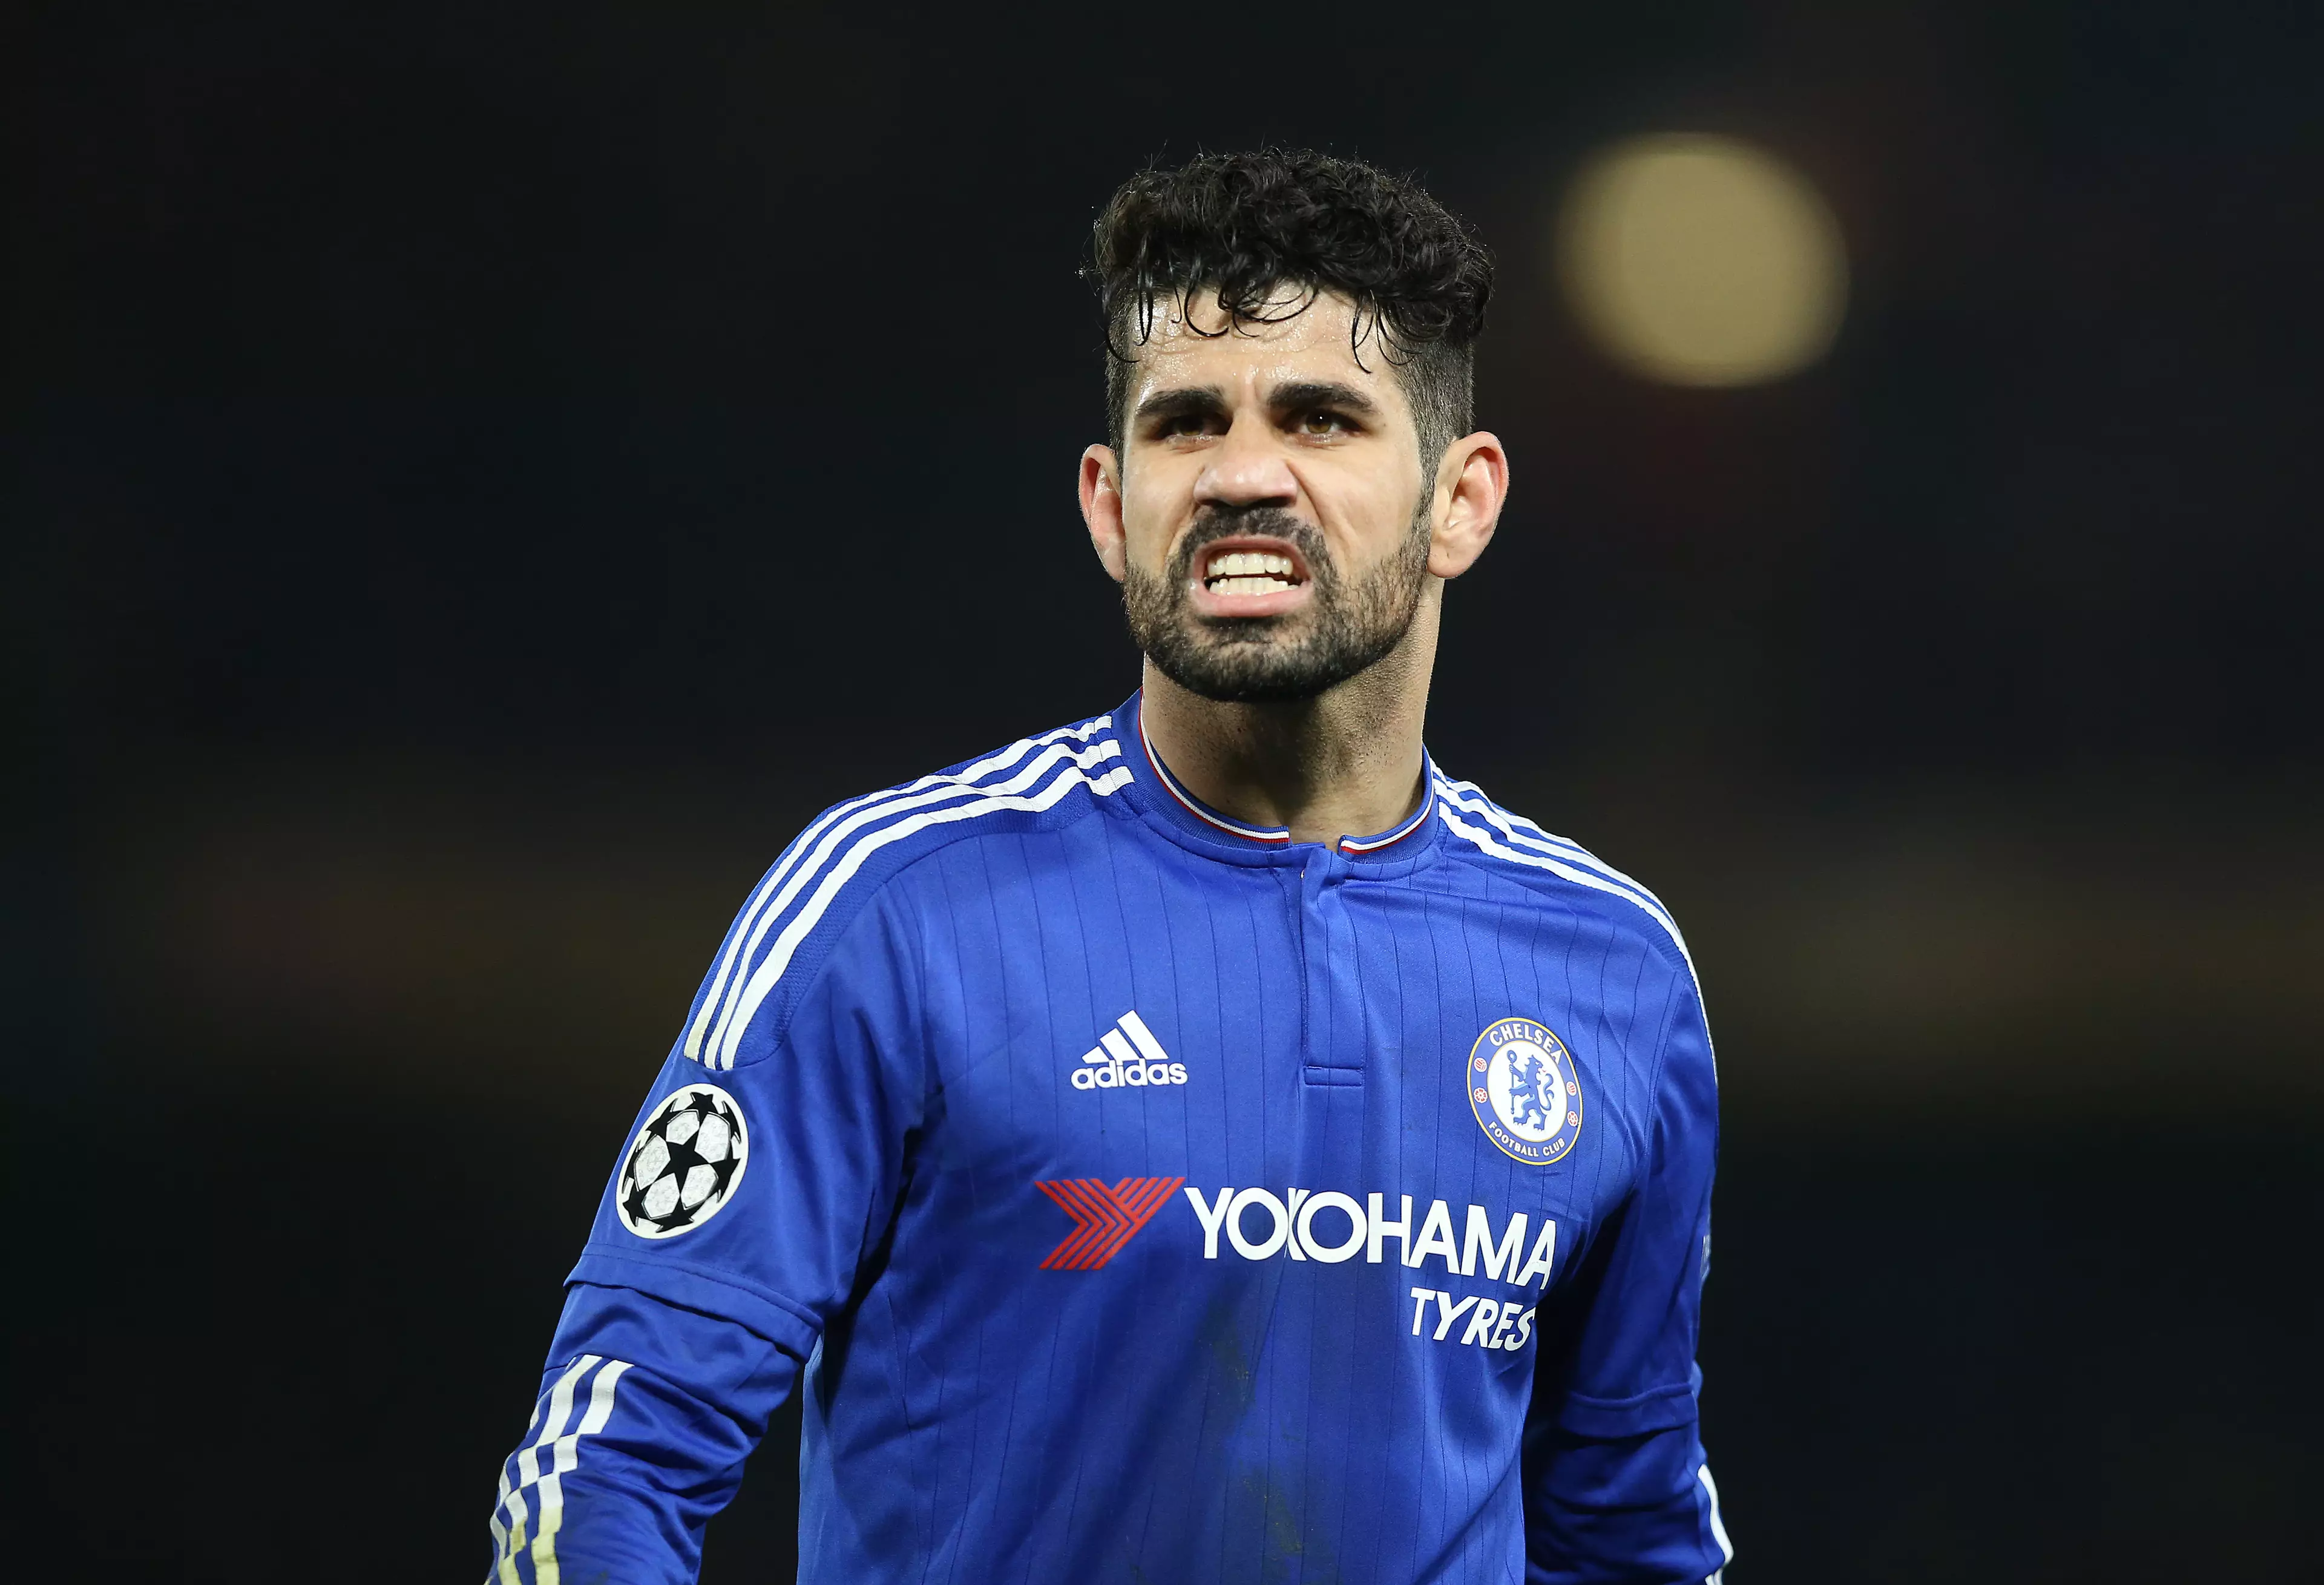 WATCH: Losing To Diego Costa On FIFA Looks Very Painful